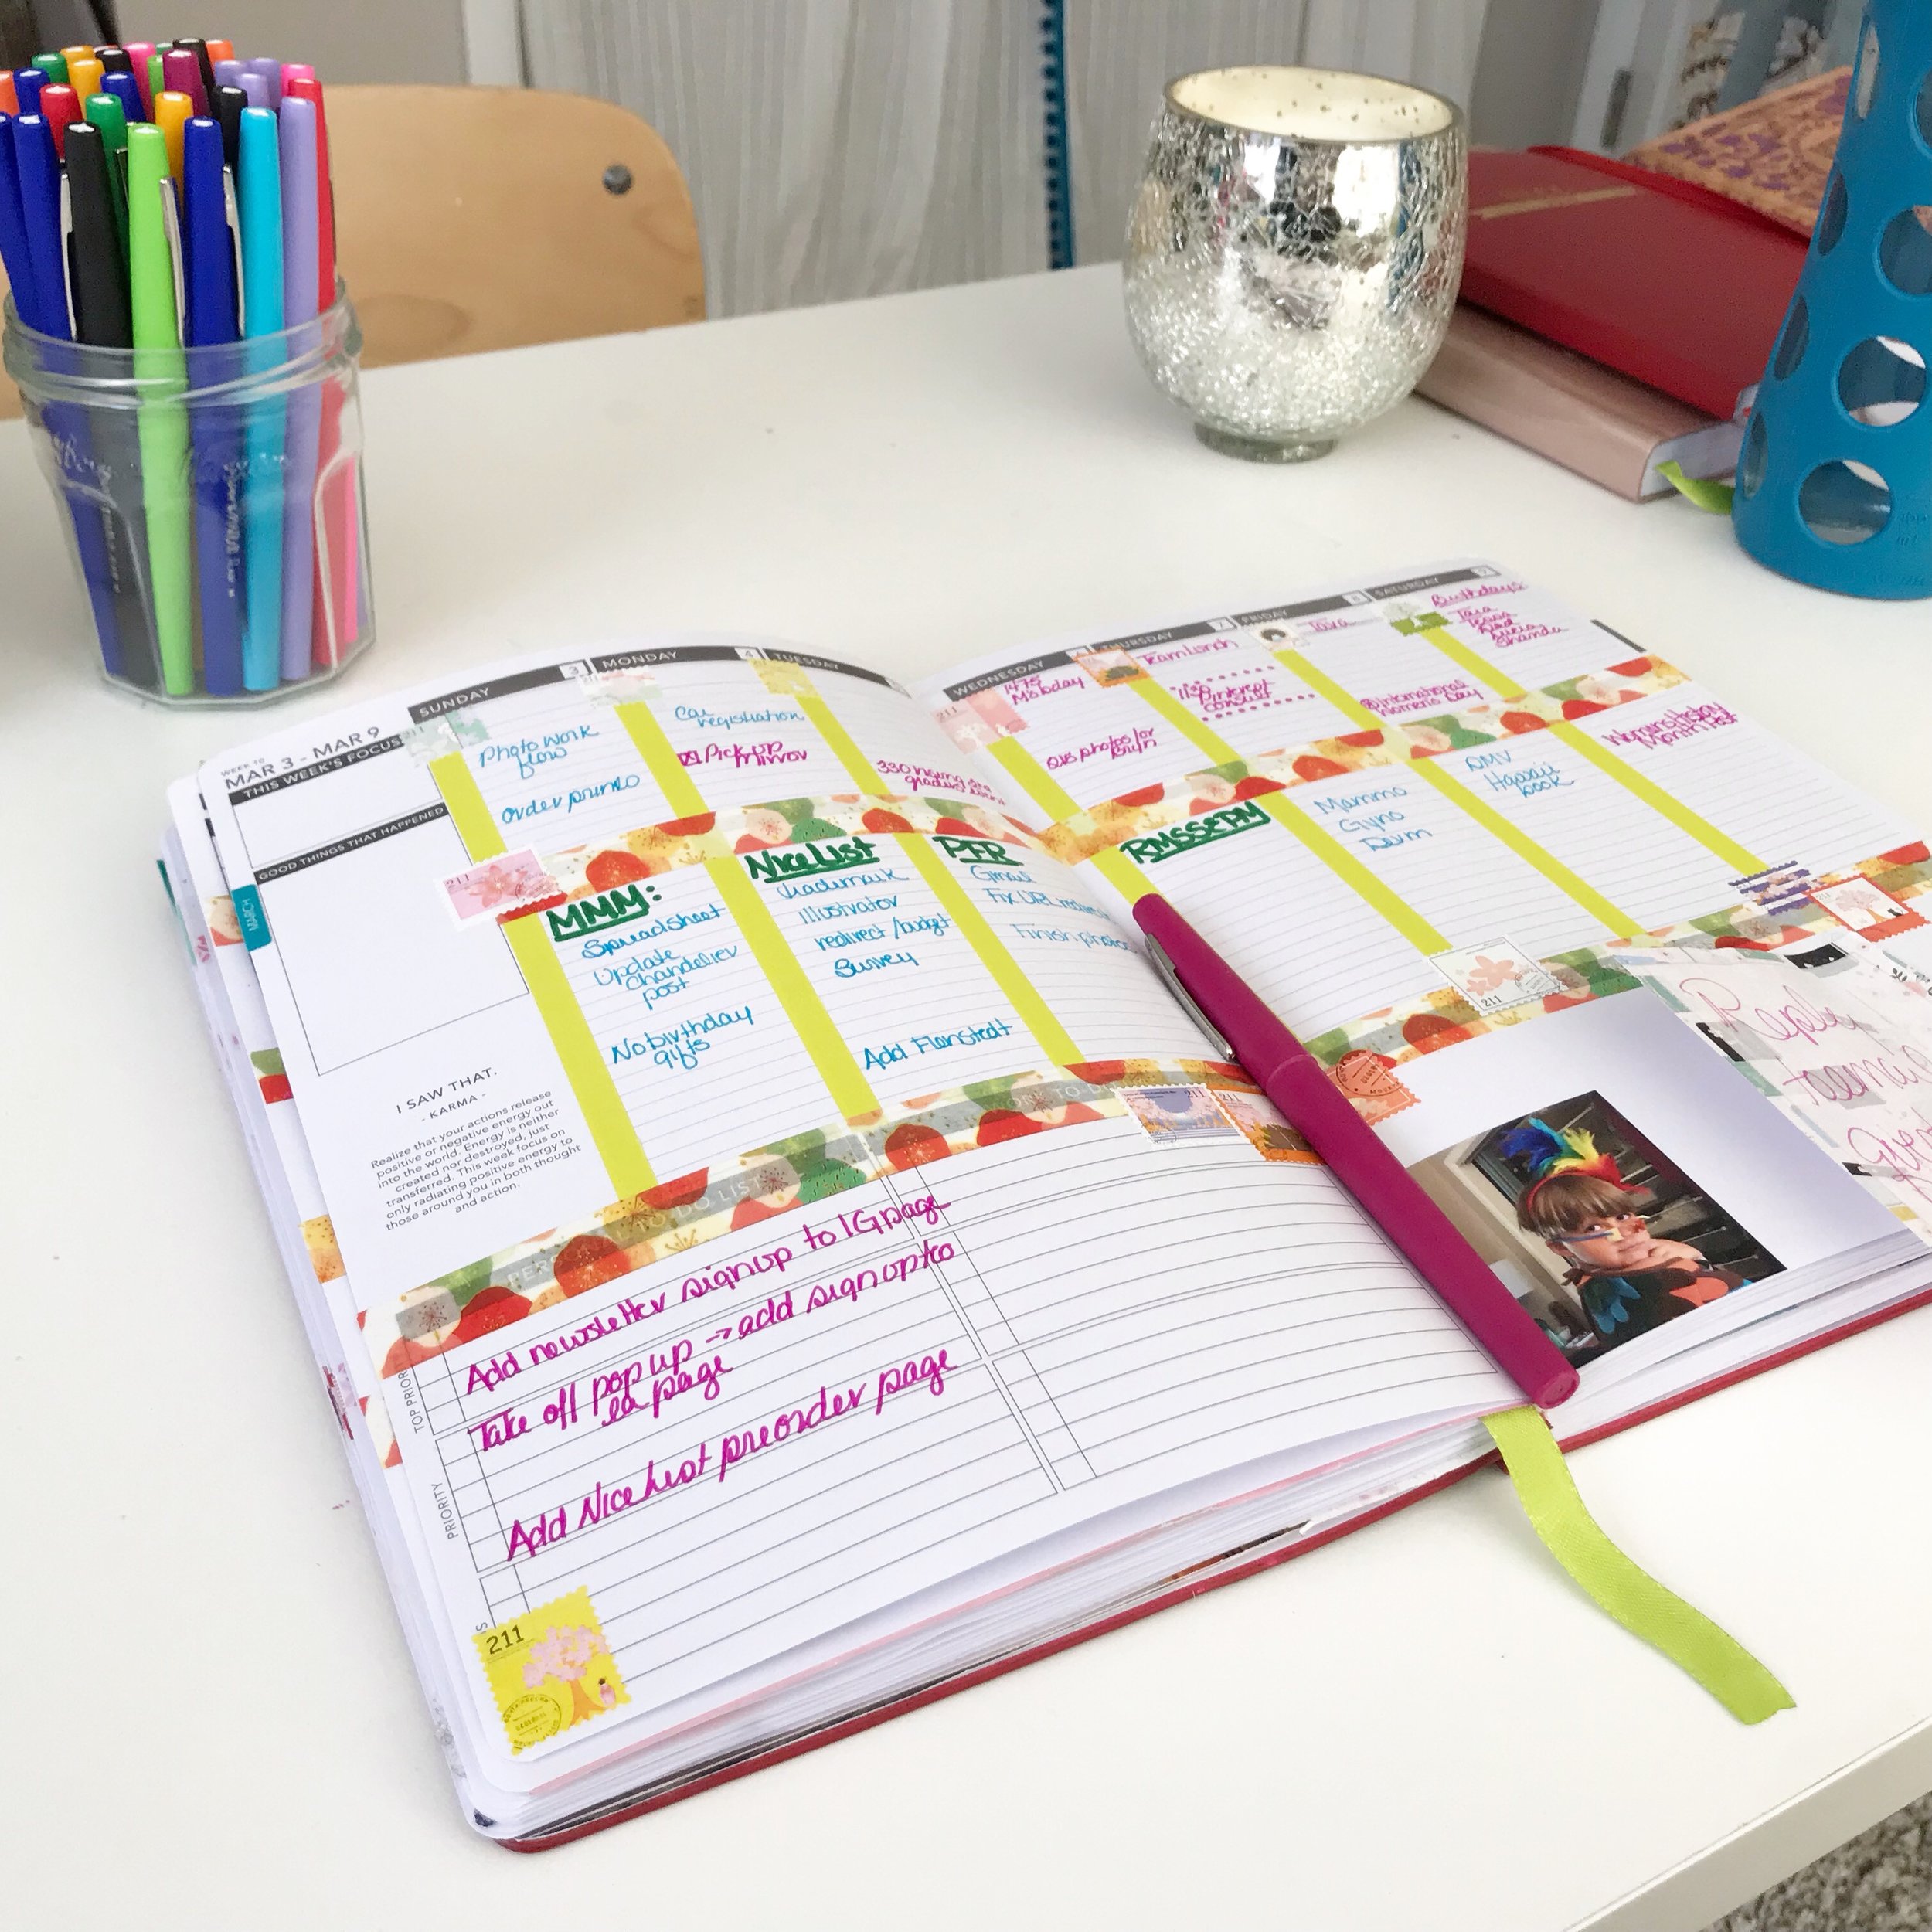 How to Decorate Your Planner with Washi Tape - The Chic Life